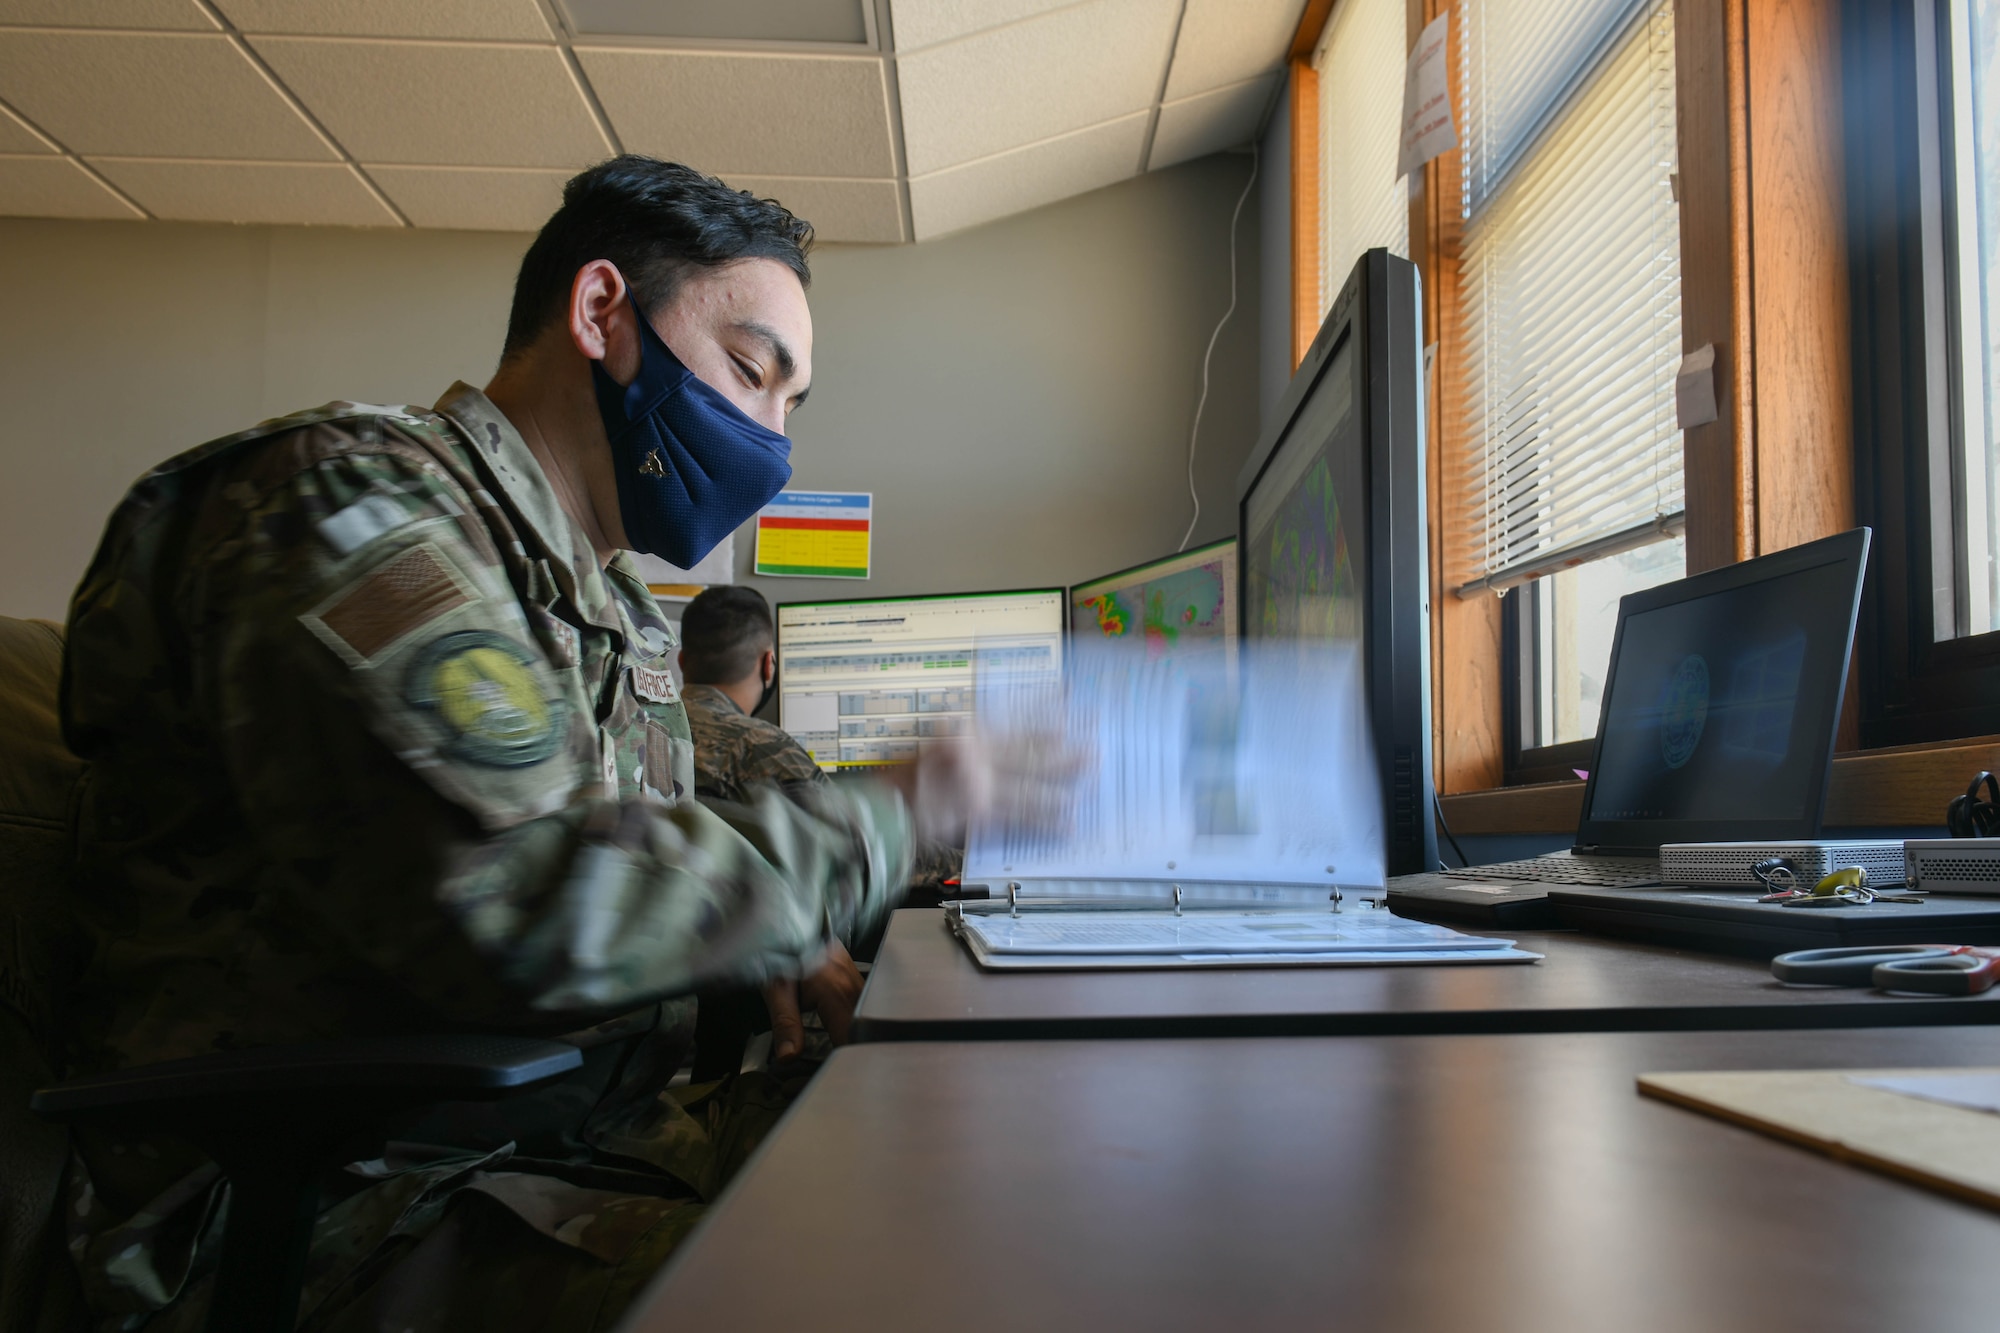 Airman 1st Class Kyle Carpenter, 22nd Operations Support Squadron weather forecaster, looks through forecast reference material March 3, 2021, at McConnell Air Force Base, Kansas. The reference material is made up of meteorological techniques based on season specific weather regimes over the United States. It also contains local forecasting techniques based on topography and effects particular weather systems have on McConnell AFB. (U.S. Air Force photo by Senior Airman Nilsa Garcia)